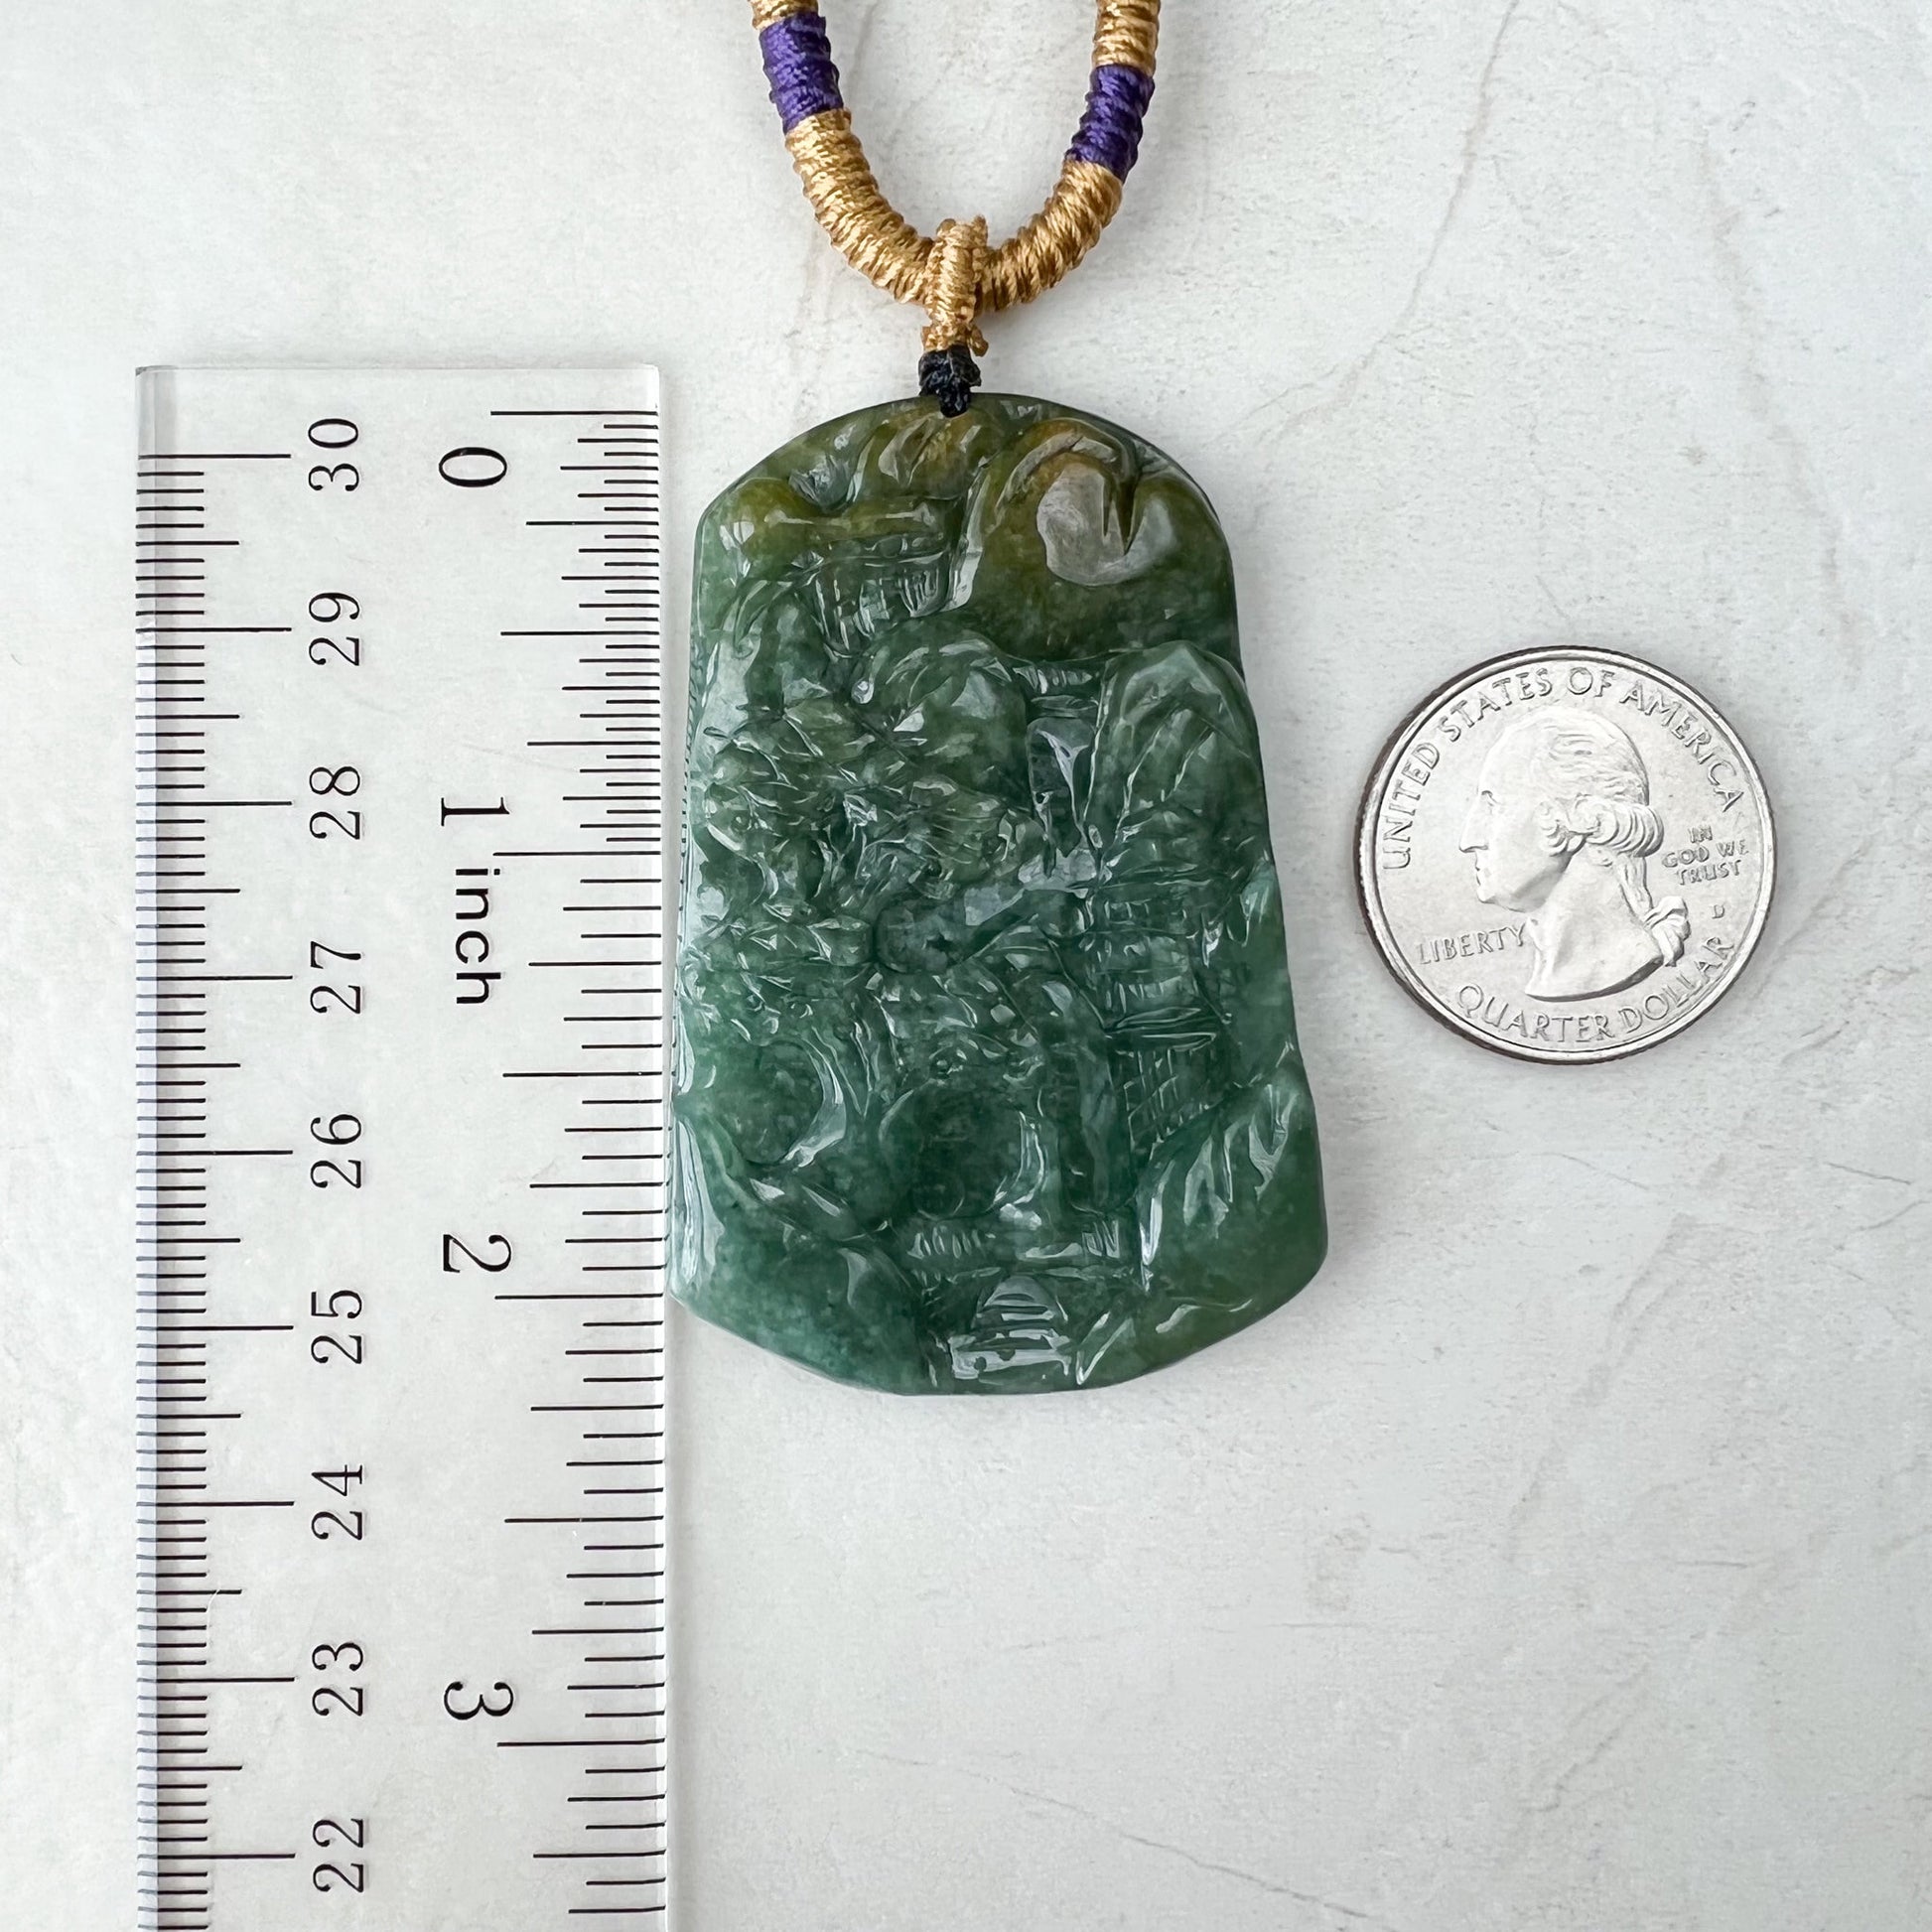 Jadeite Jade Landscape Mountain Forest River Tree, Scenery Hand Carved Pendant Necklace, YJ-1221-0177915 - AriaDesignCollection